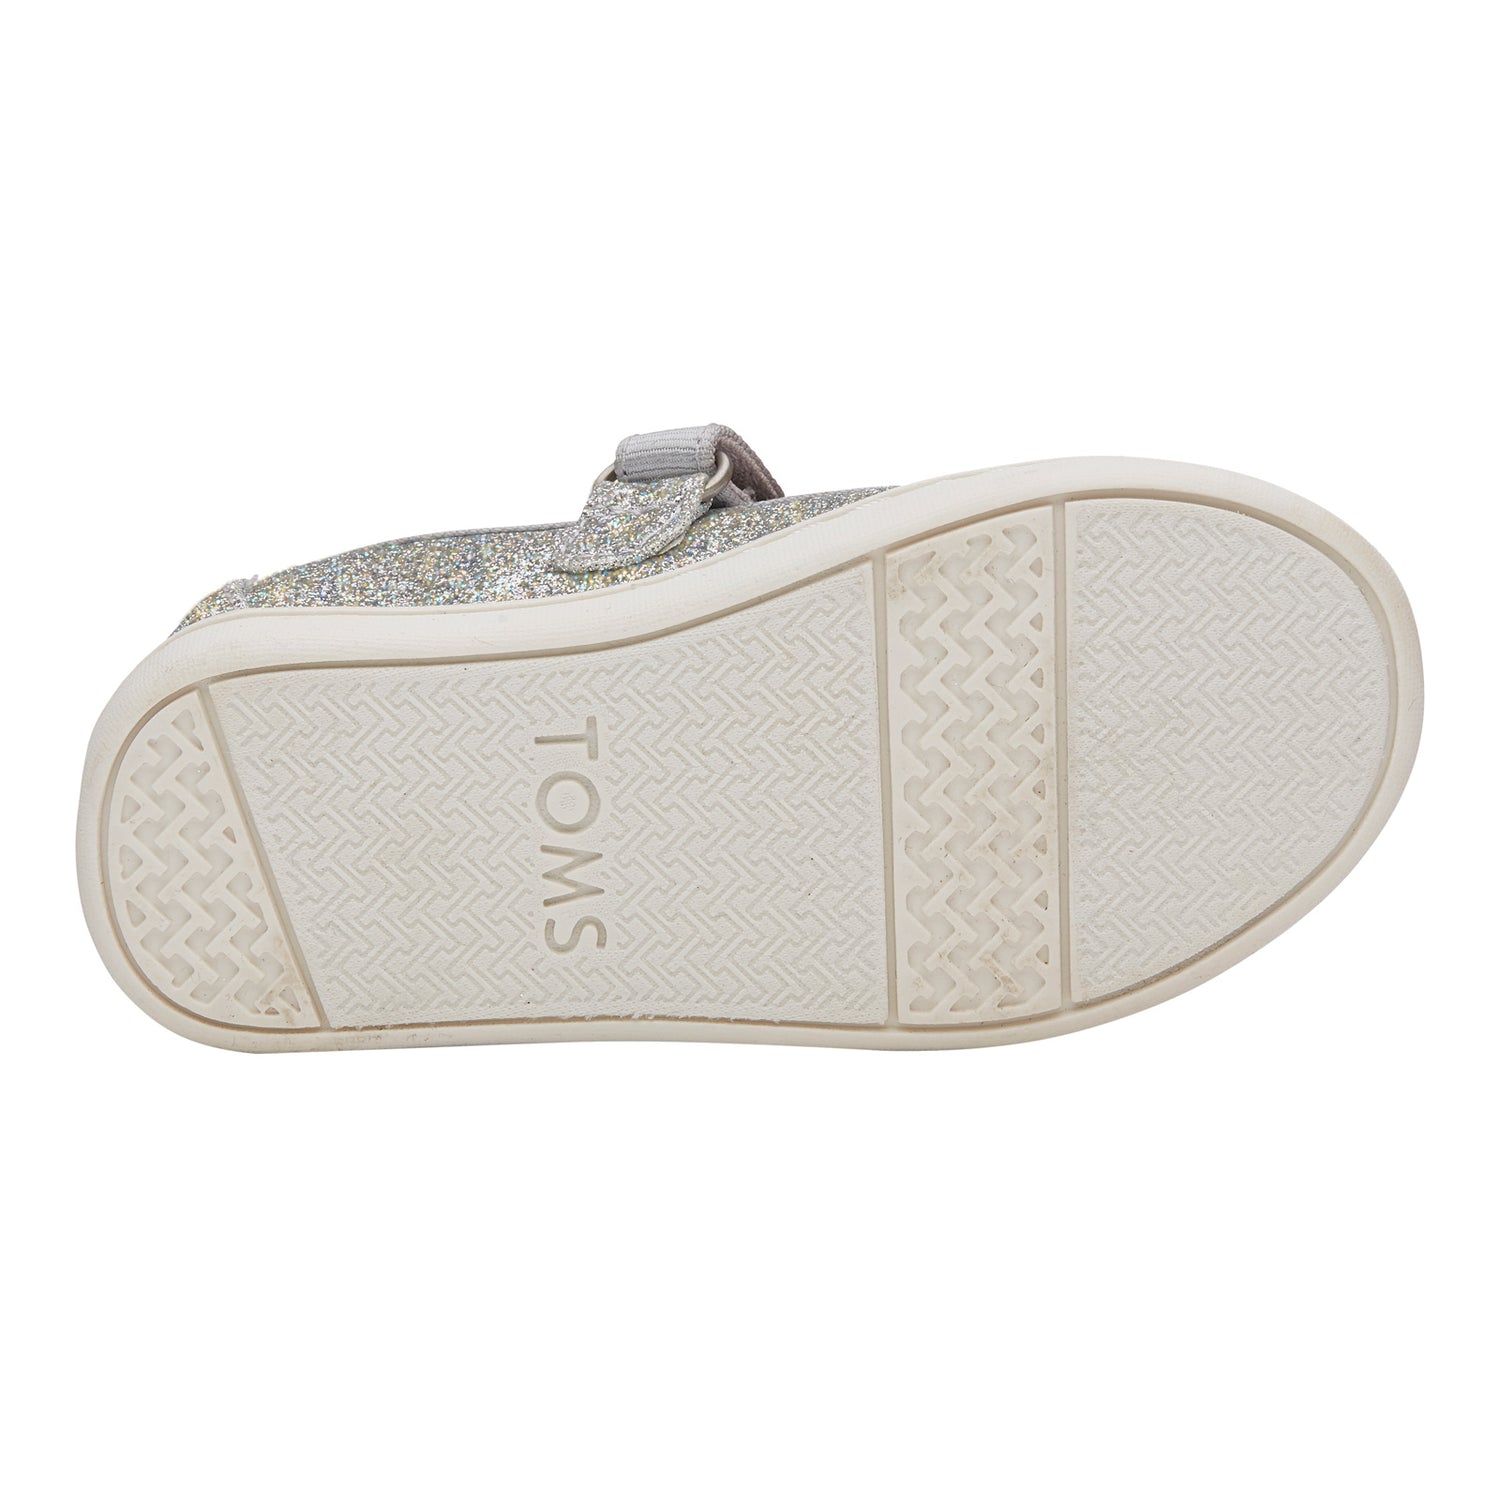 Peltz Shoes  Girl's Toms Tiny Mary Jane - Toddler SILVER 10011521